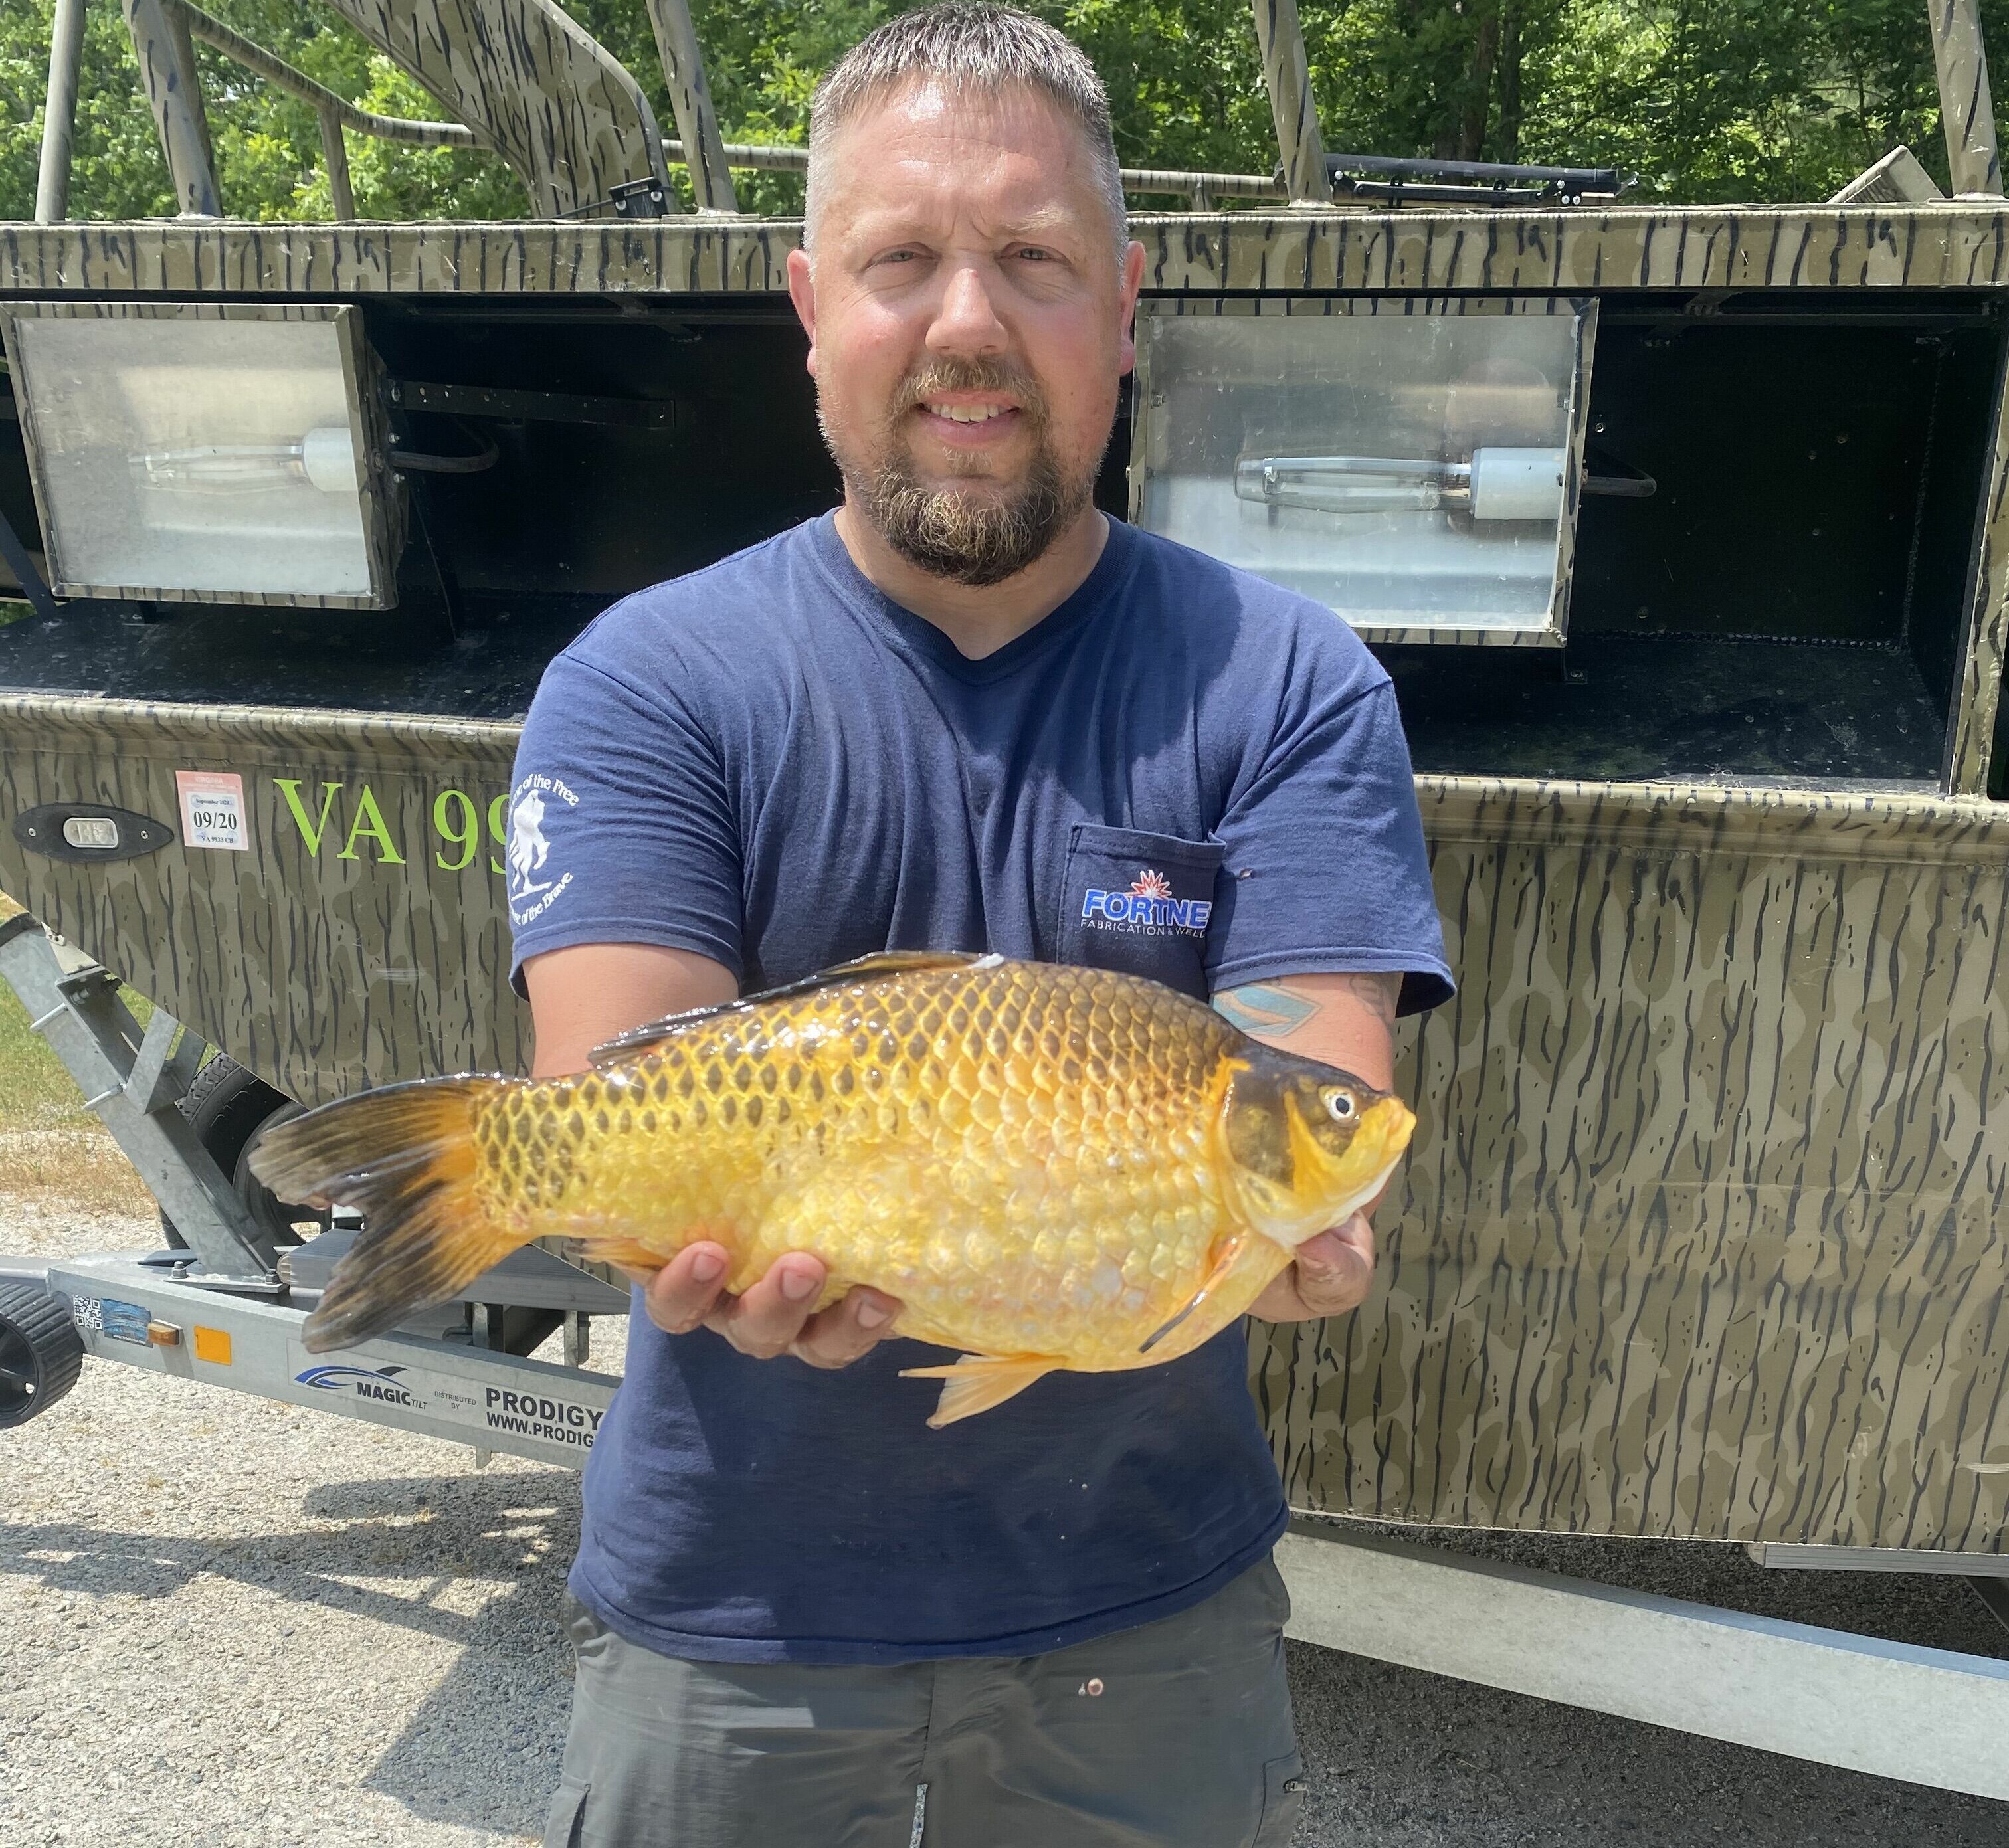 Chesterfield, Virginia man catches record breaking Goldfish in Fairfax County